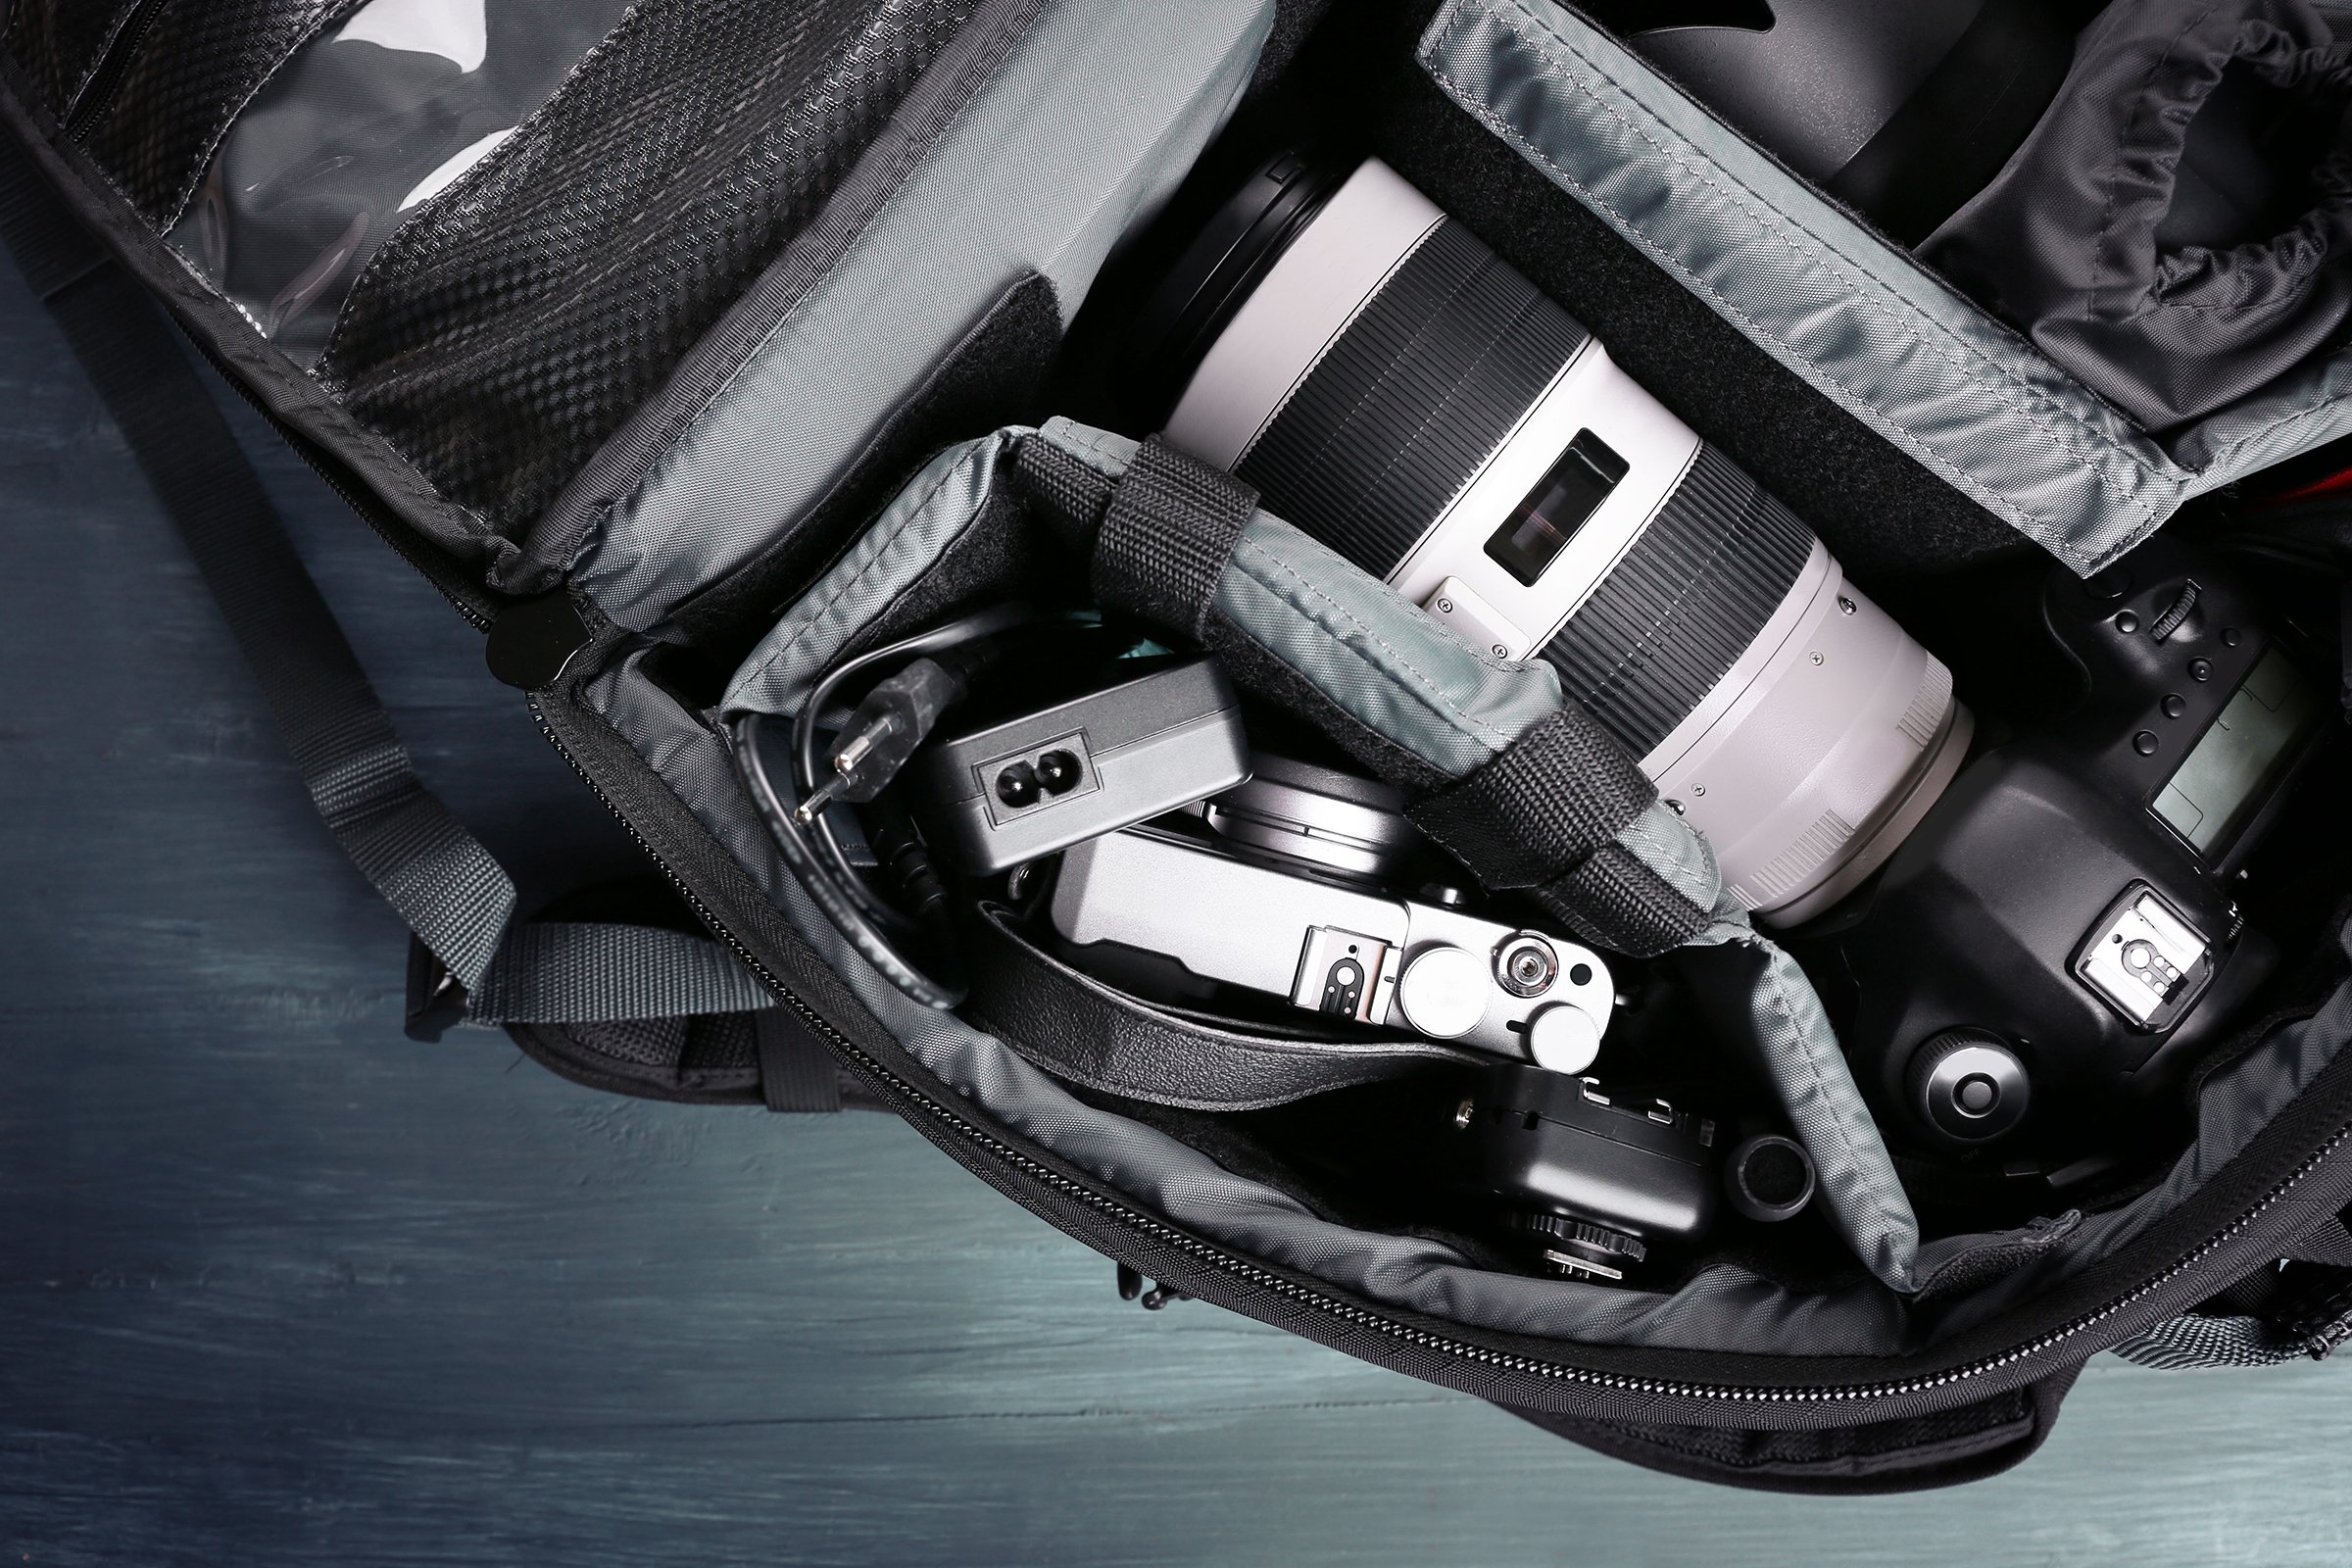 Best camera bags for wildlife photographers - Discover Wildlife